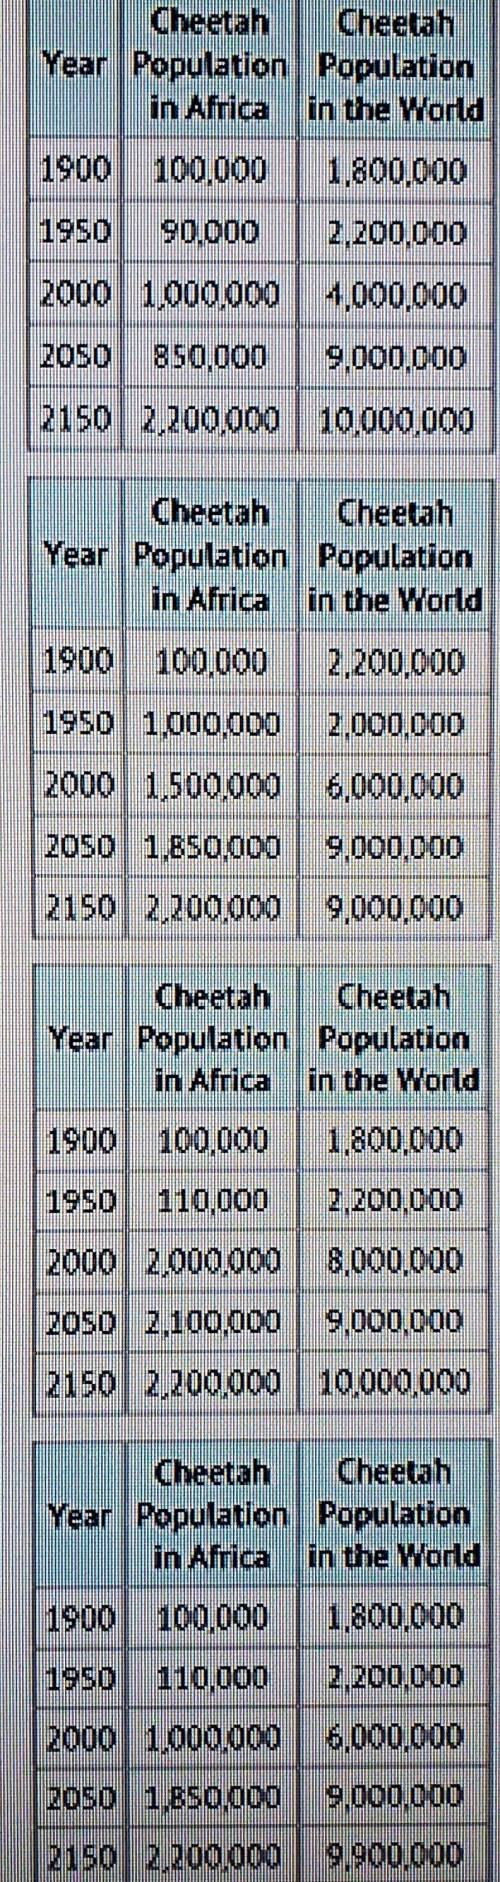 This bar graph shows the cheetah population of Africa and the world in the past as well as the proj